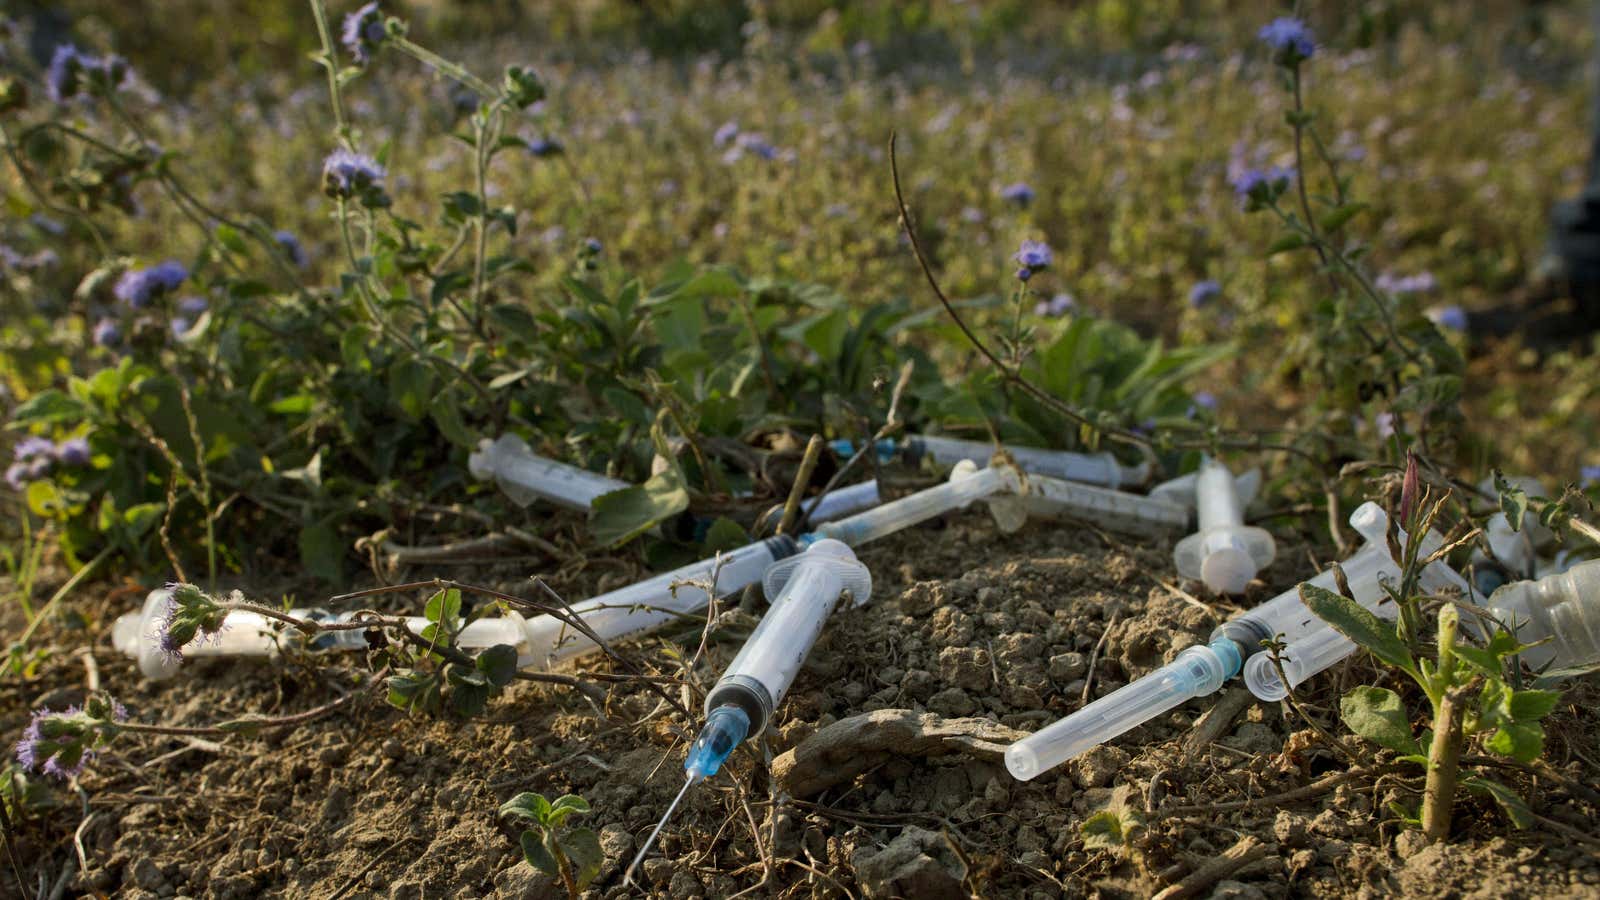 In this photo taken on Feb 11, 2013, freshly dumped hypodermic syringes and a needle litter an abandoned cemetery in Myitkyina, the provincial capital of…